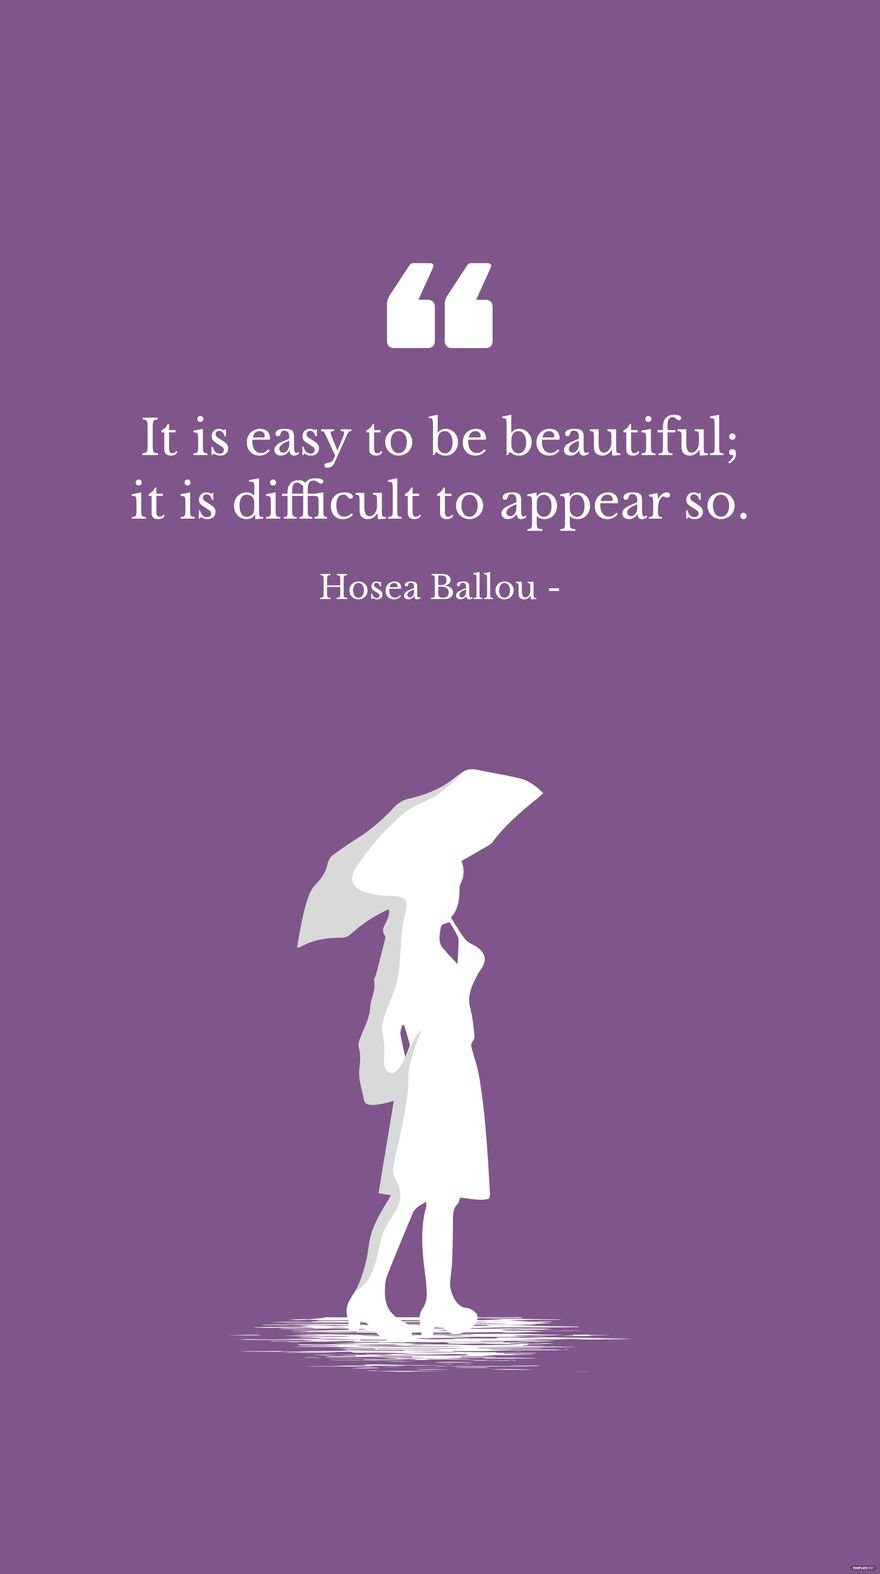 Hosea Ballou - It is easy to be beautiful; it is difficult to appear so.